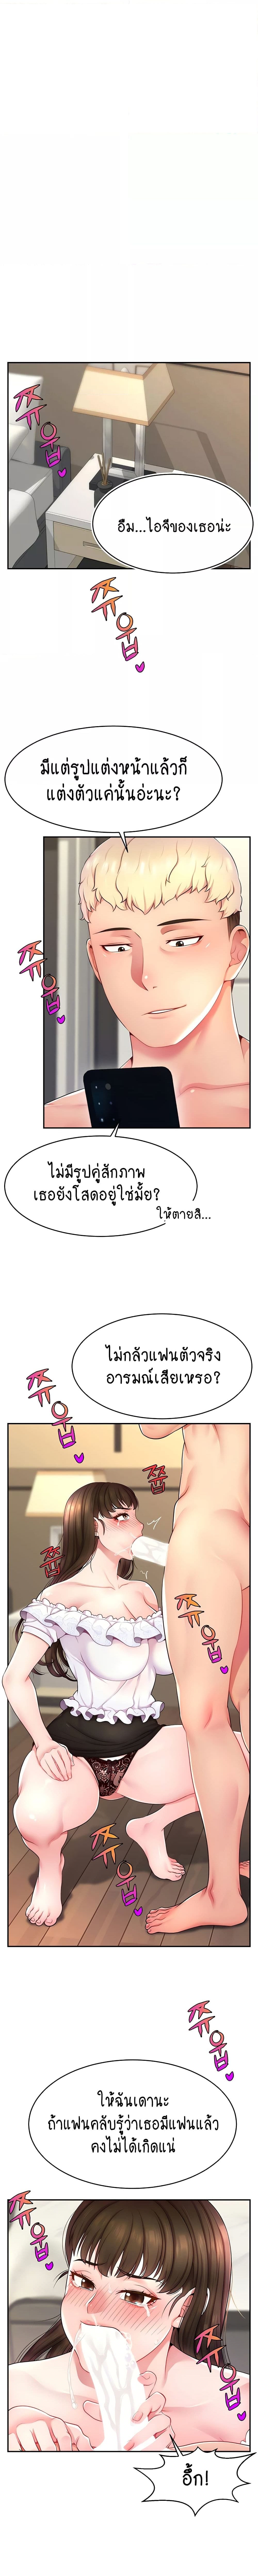 Making Friends With Streamers by Hacking! ตอนที่ 11 ภาพ 5